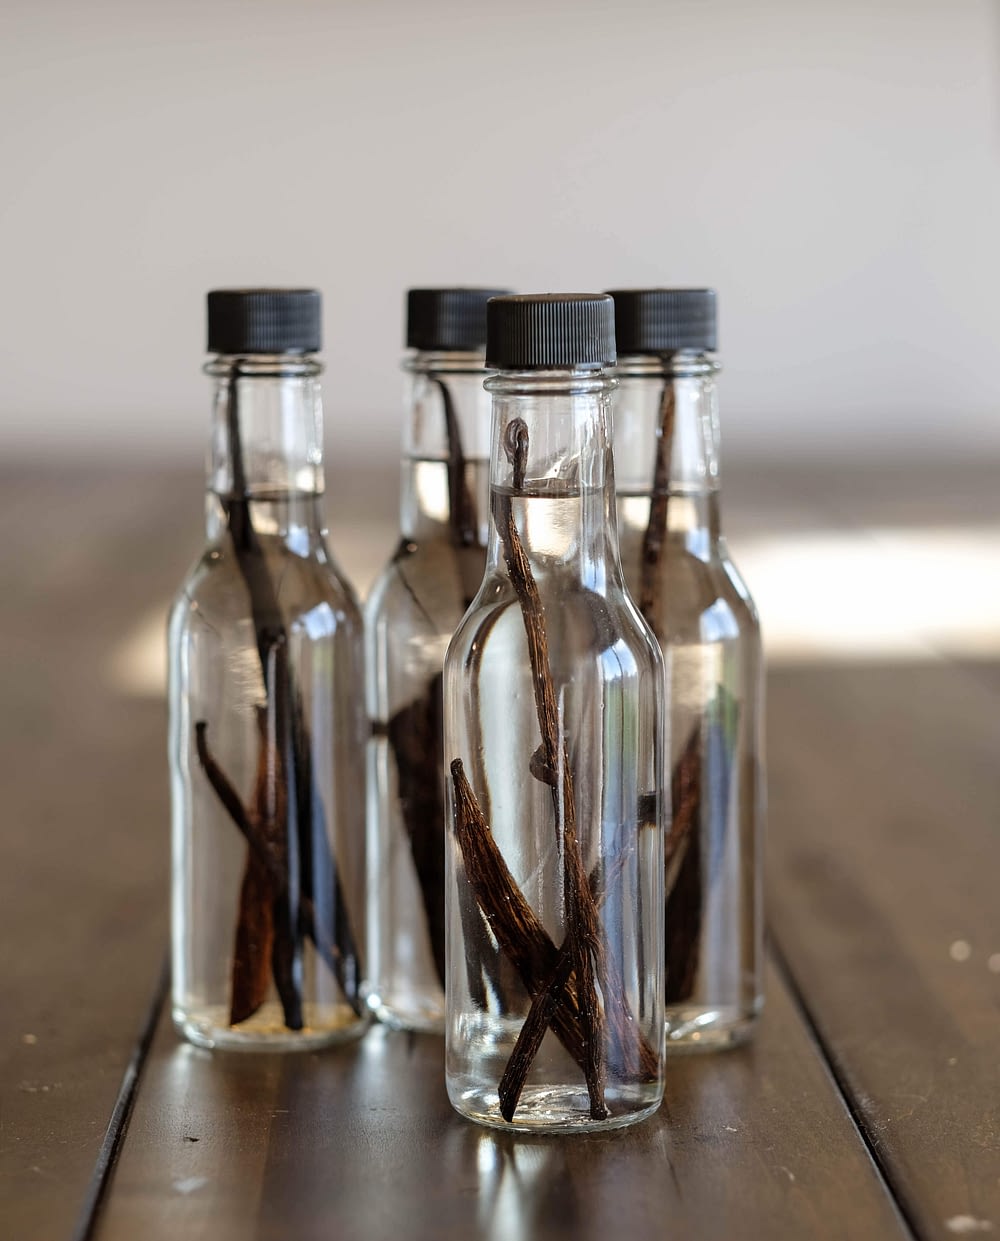 Homemade Vanilla, bottled before it has finished extracting